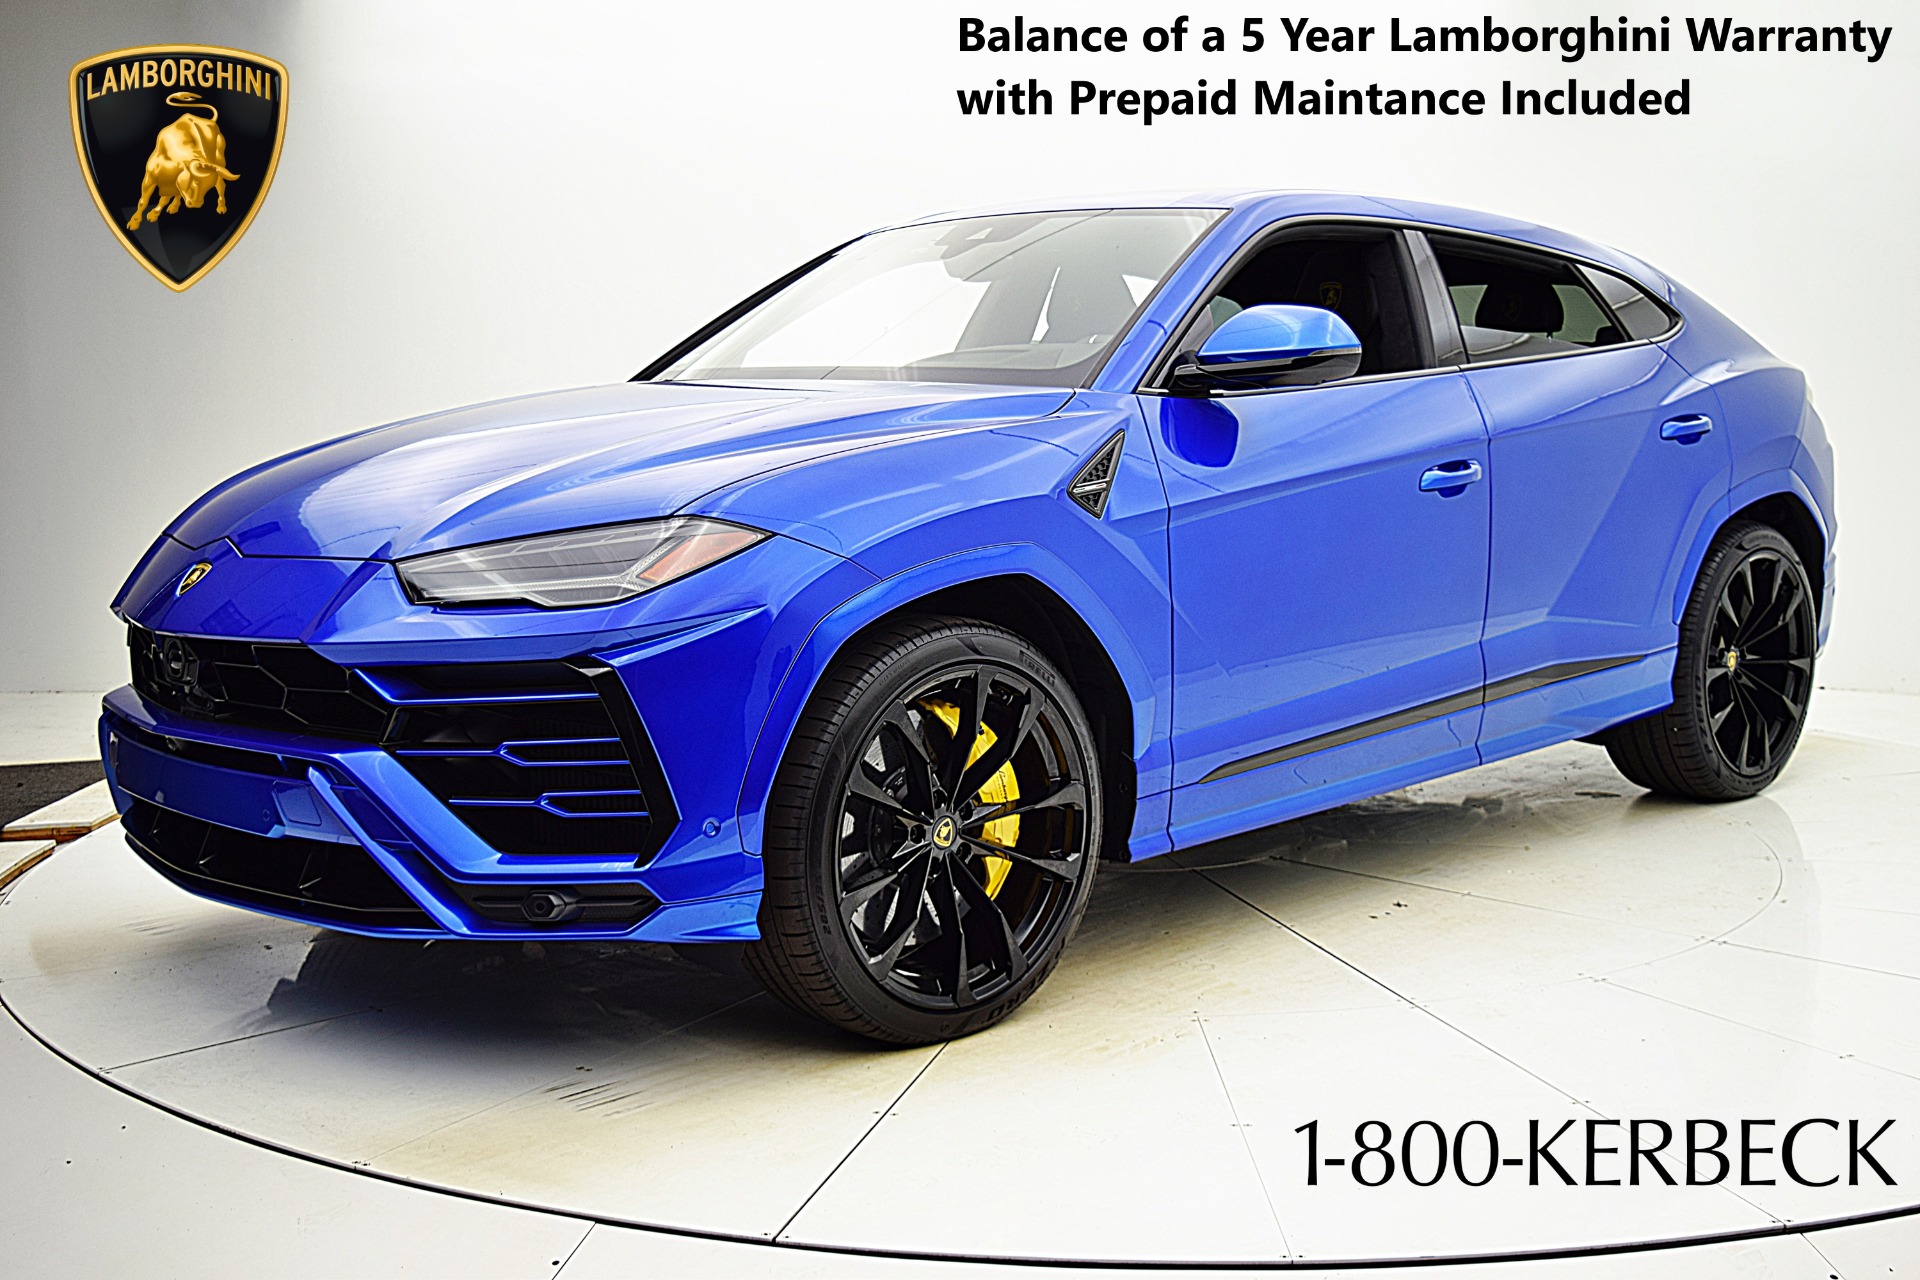 Used 2022 Lamborghini Urus / LEASE OPTIONS AVAILABLE for sale $269,000 at Bentley Palmyra N.J. in Palmyra NJ 08065 2